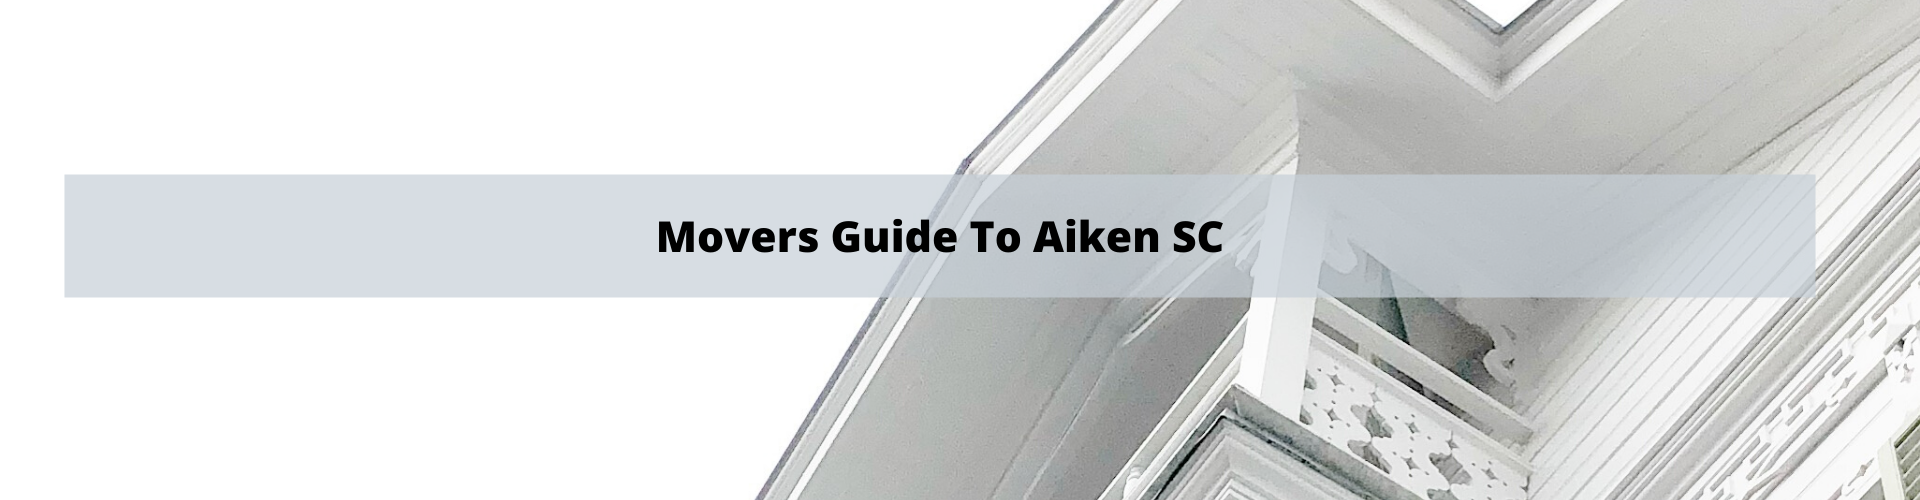 Movers Guide To Aiken SC